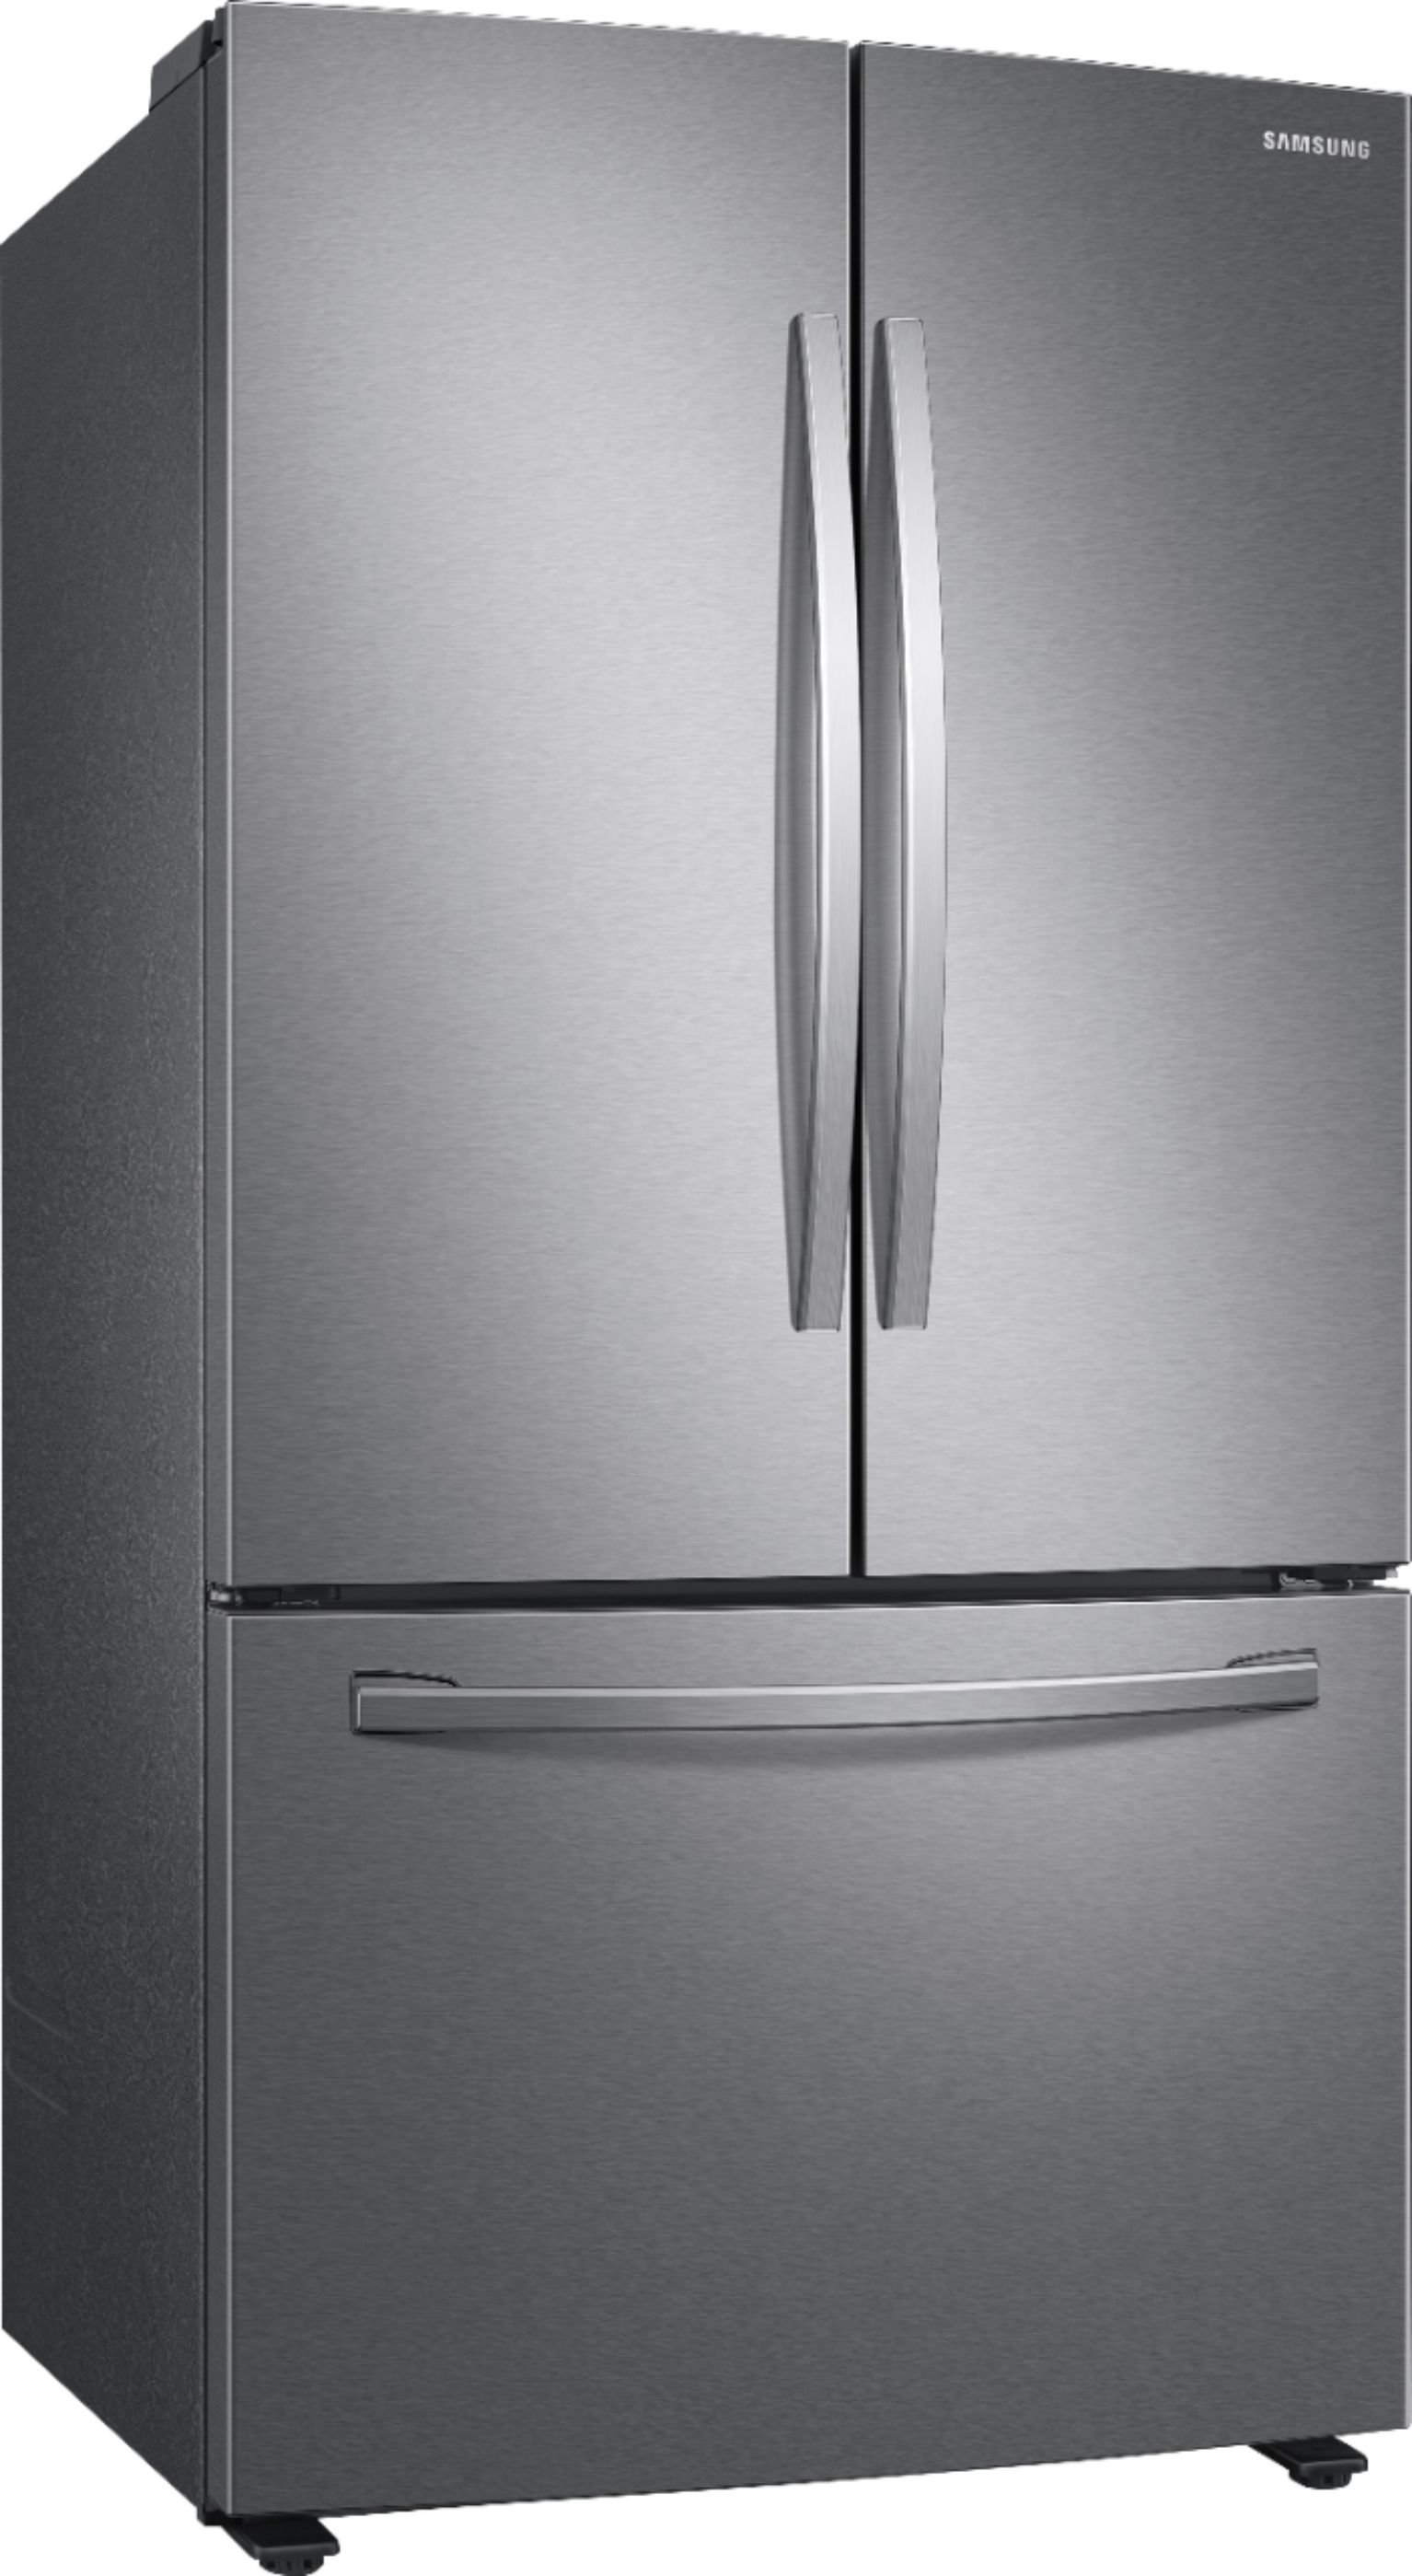 Angle View: Samsung - 19.5 cu. ft. 3-Door French Door Refrigerator with Wi-Fi - White